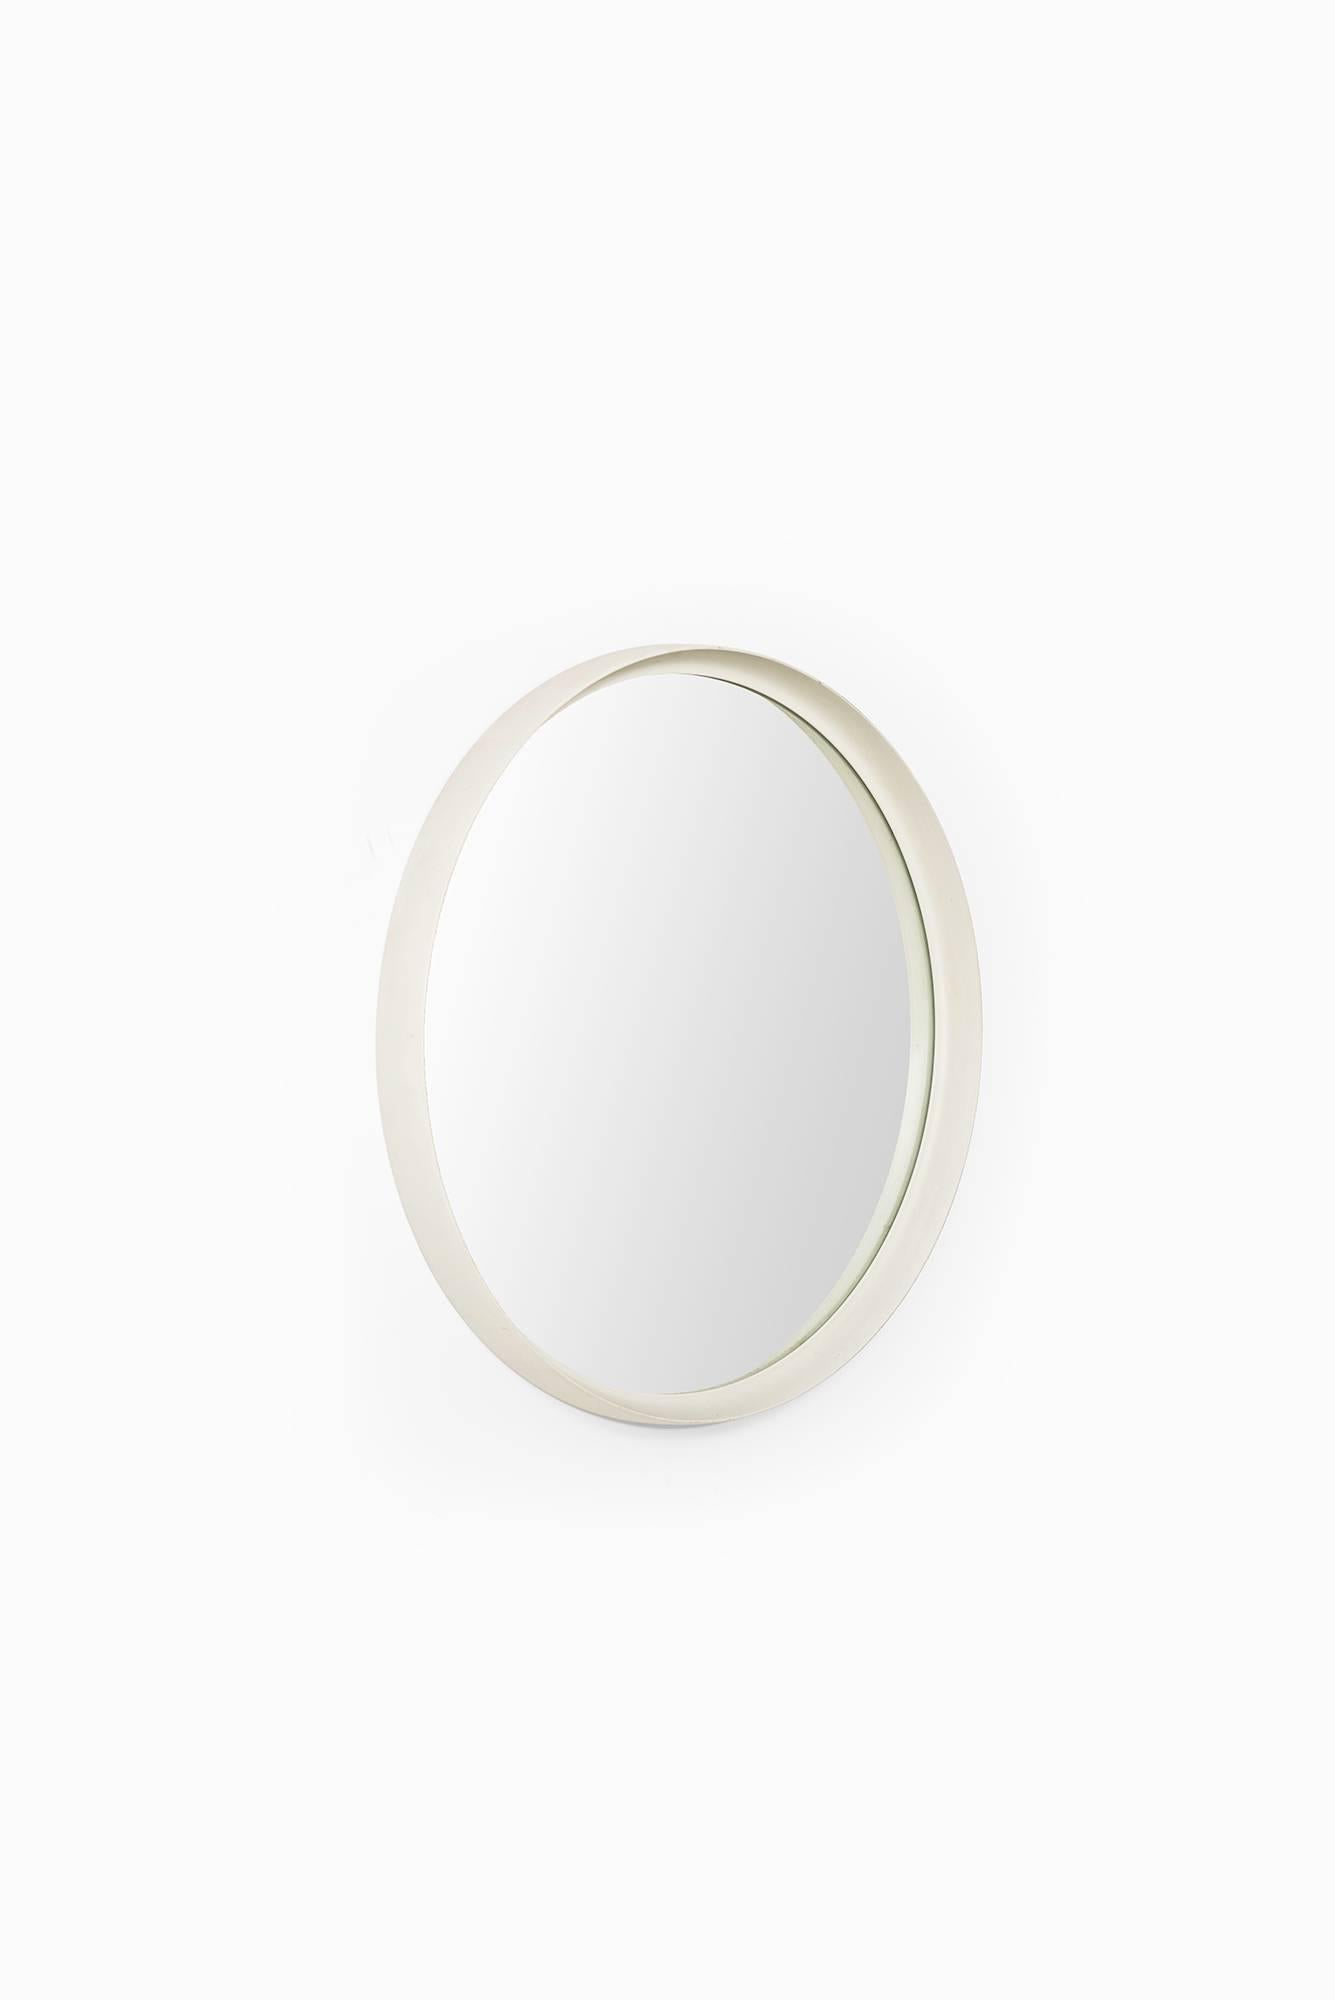 Scandinavian Modern White Lacquered Round Mirror Produced in Sweden